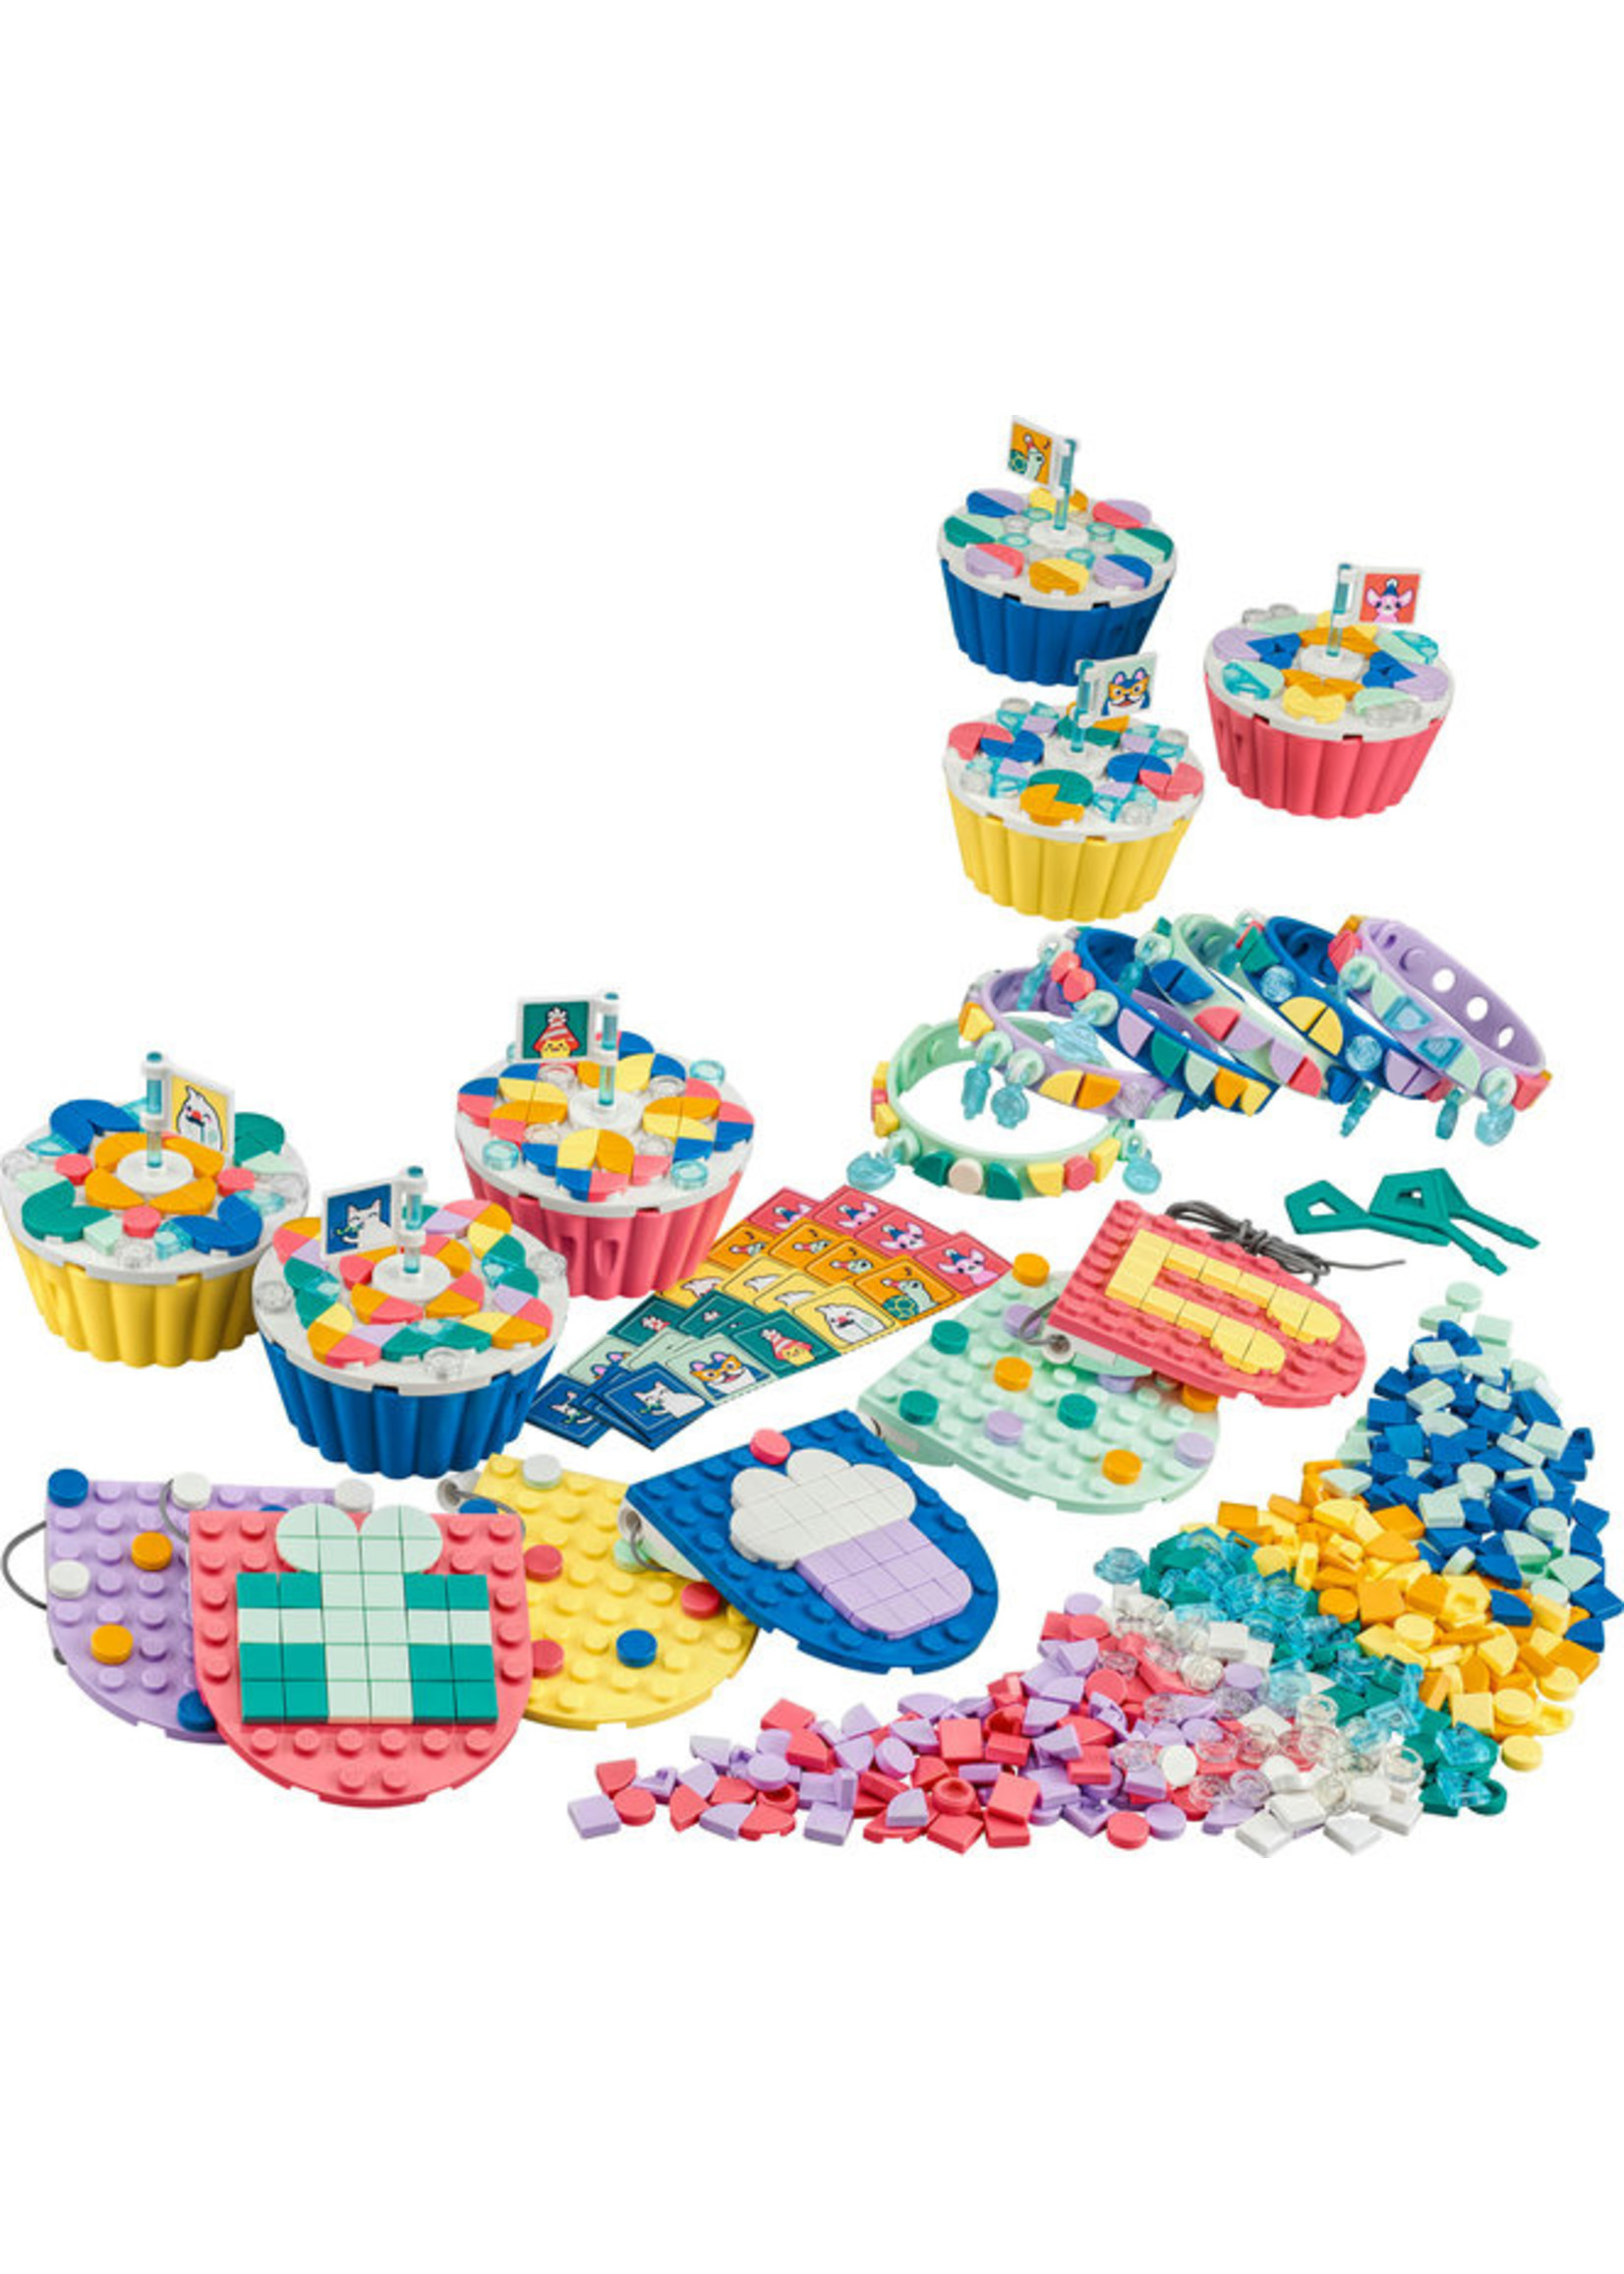 LEGO 41806 - Ultimate Party Kit